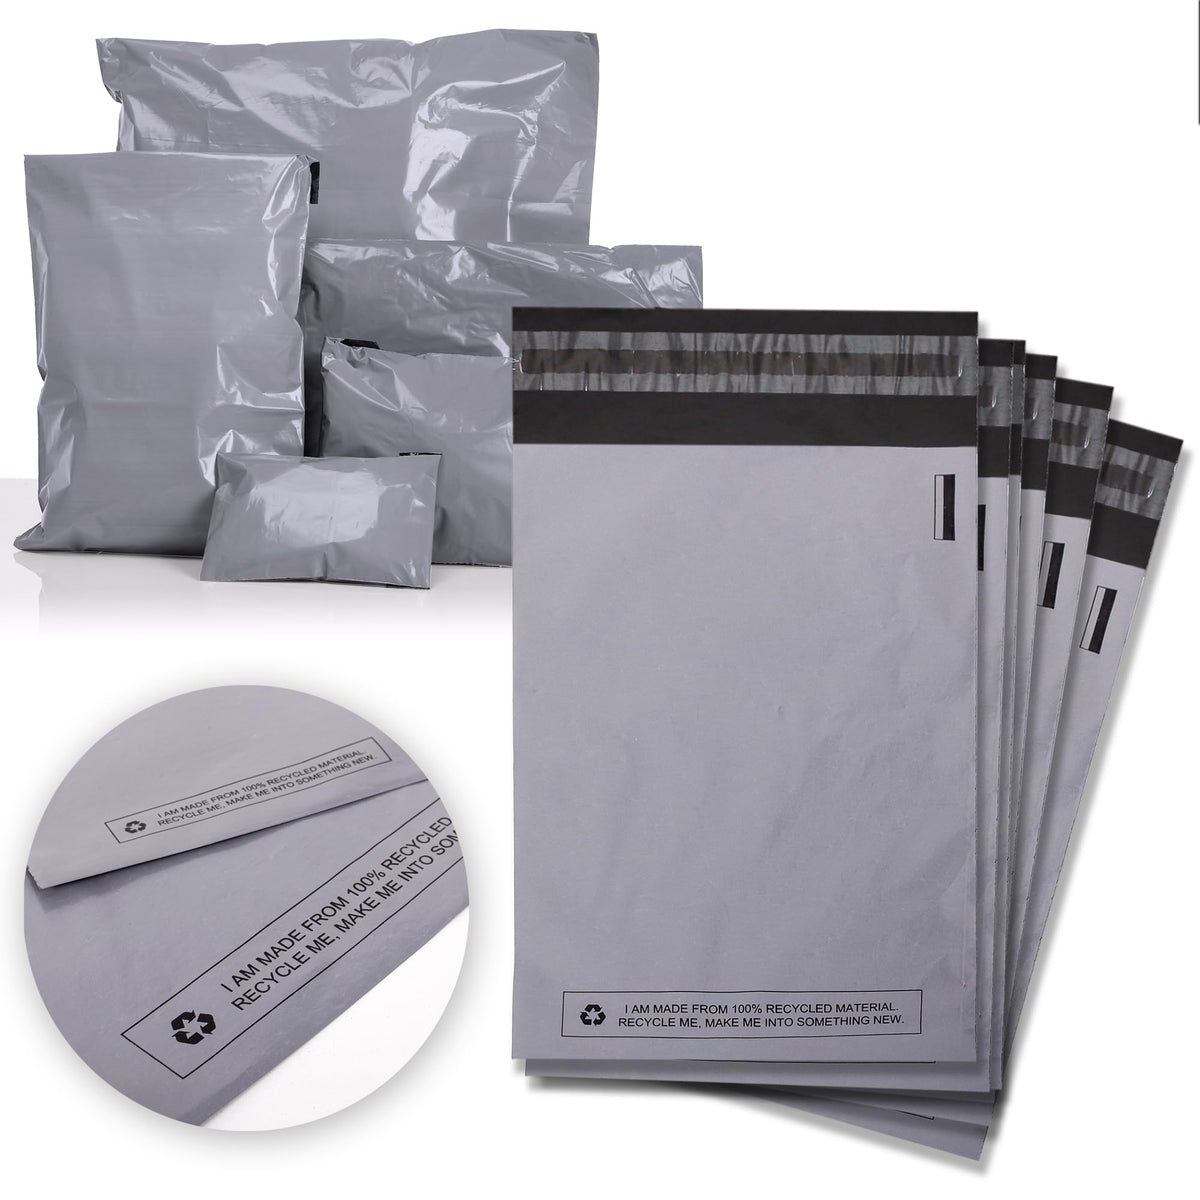 Sabco - 100 Mailing Bags 4.5 x 7 inches – Self Adhesive, Waterproof and Tear-Proof Postal Bags – Small Sized Grey Plastic Mailing Mail Post Postage Plastic Bags (4.5 x 7 inches, 100)